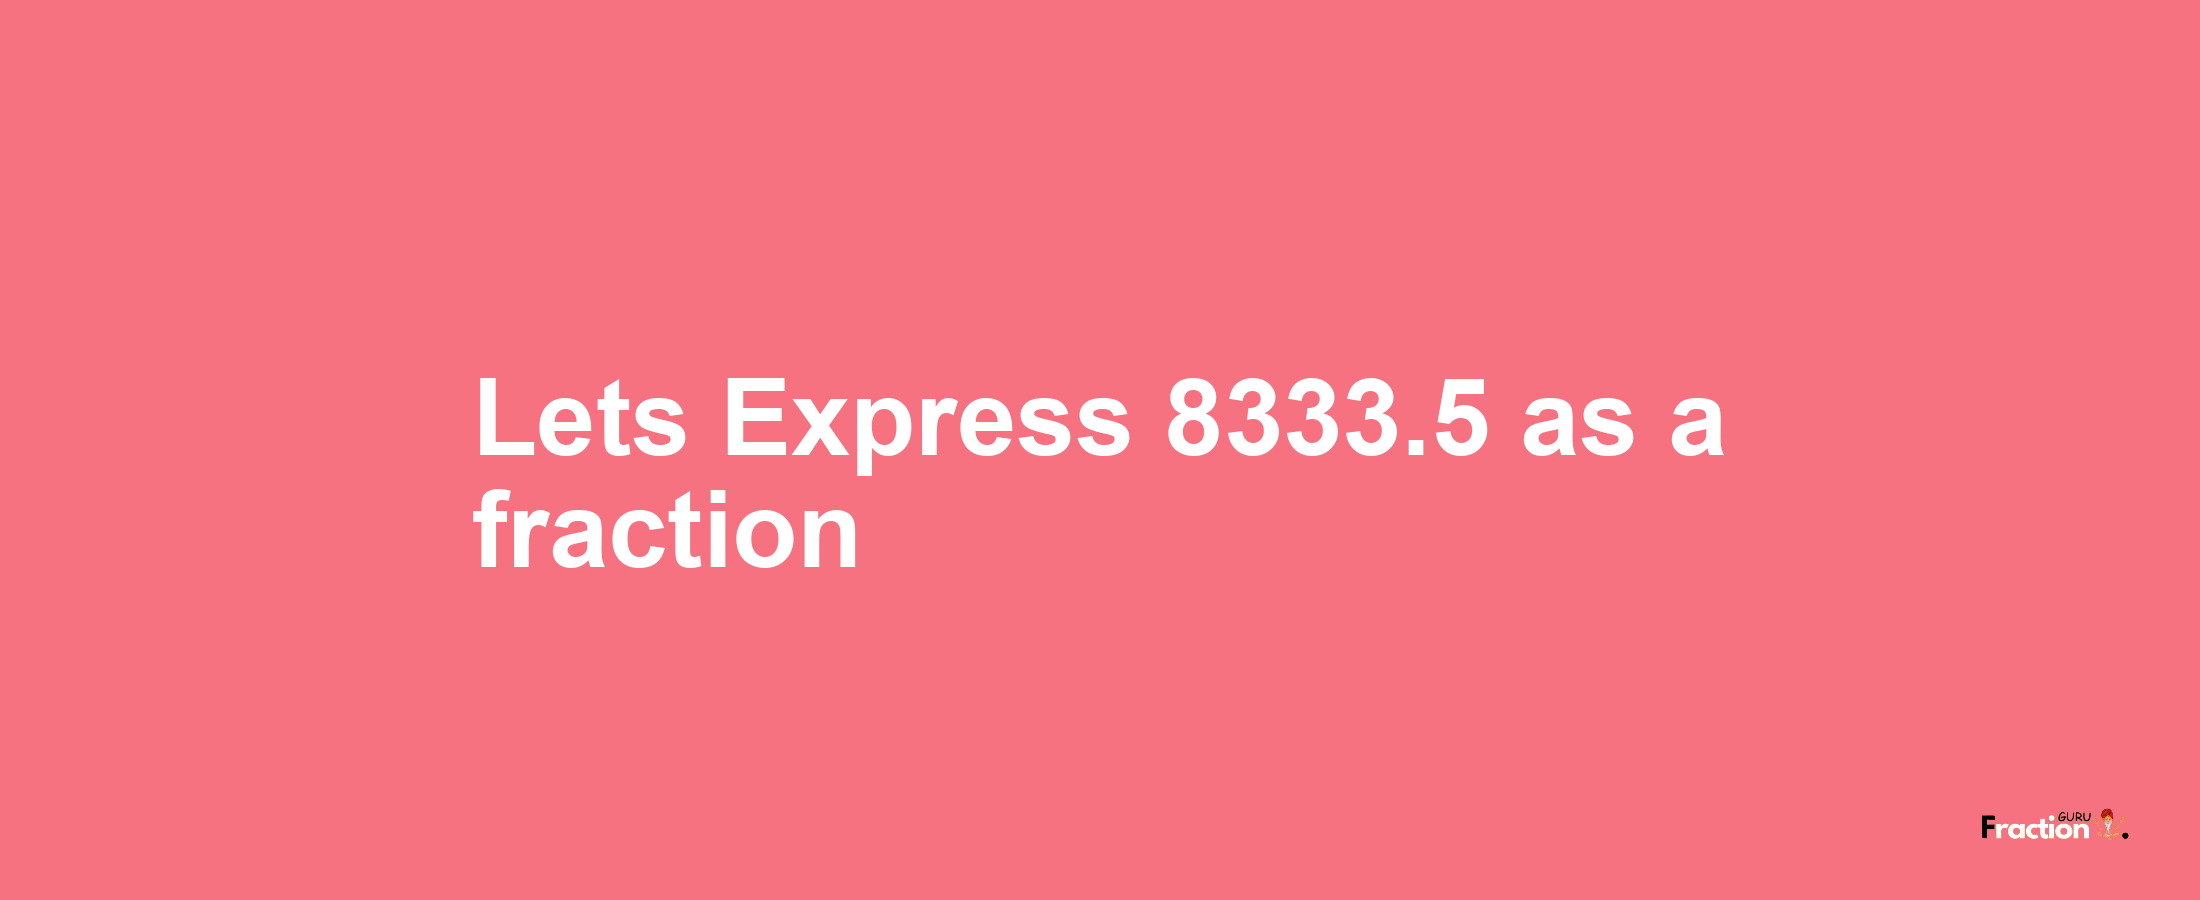 Lets Express 8333.5 as afraction